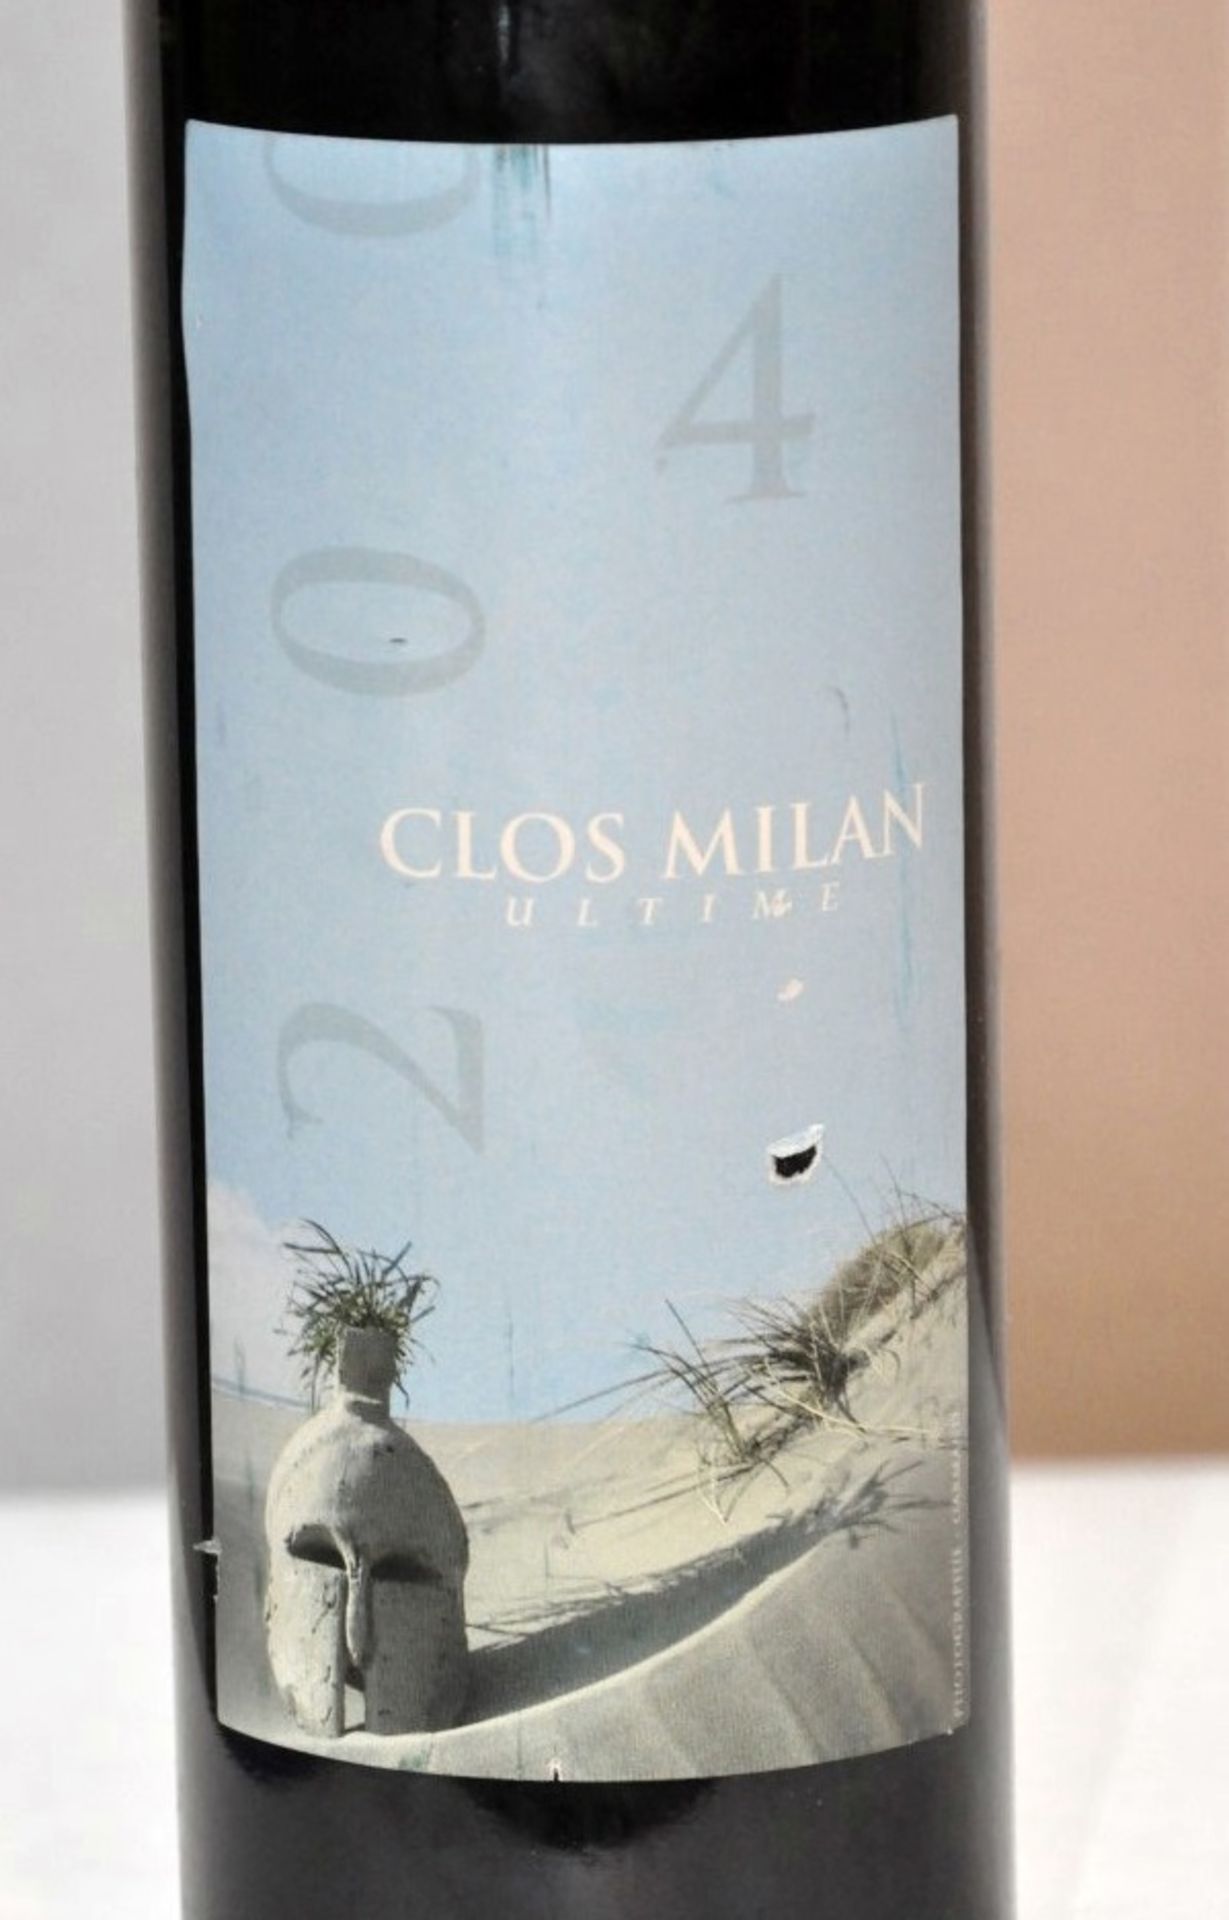 2 x Clos Milan Ultime Red - Henri Milan, Provence – French Wine – 2004 – 75cl Bottle - Volume - Image 2 of 3